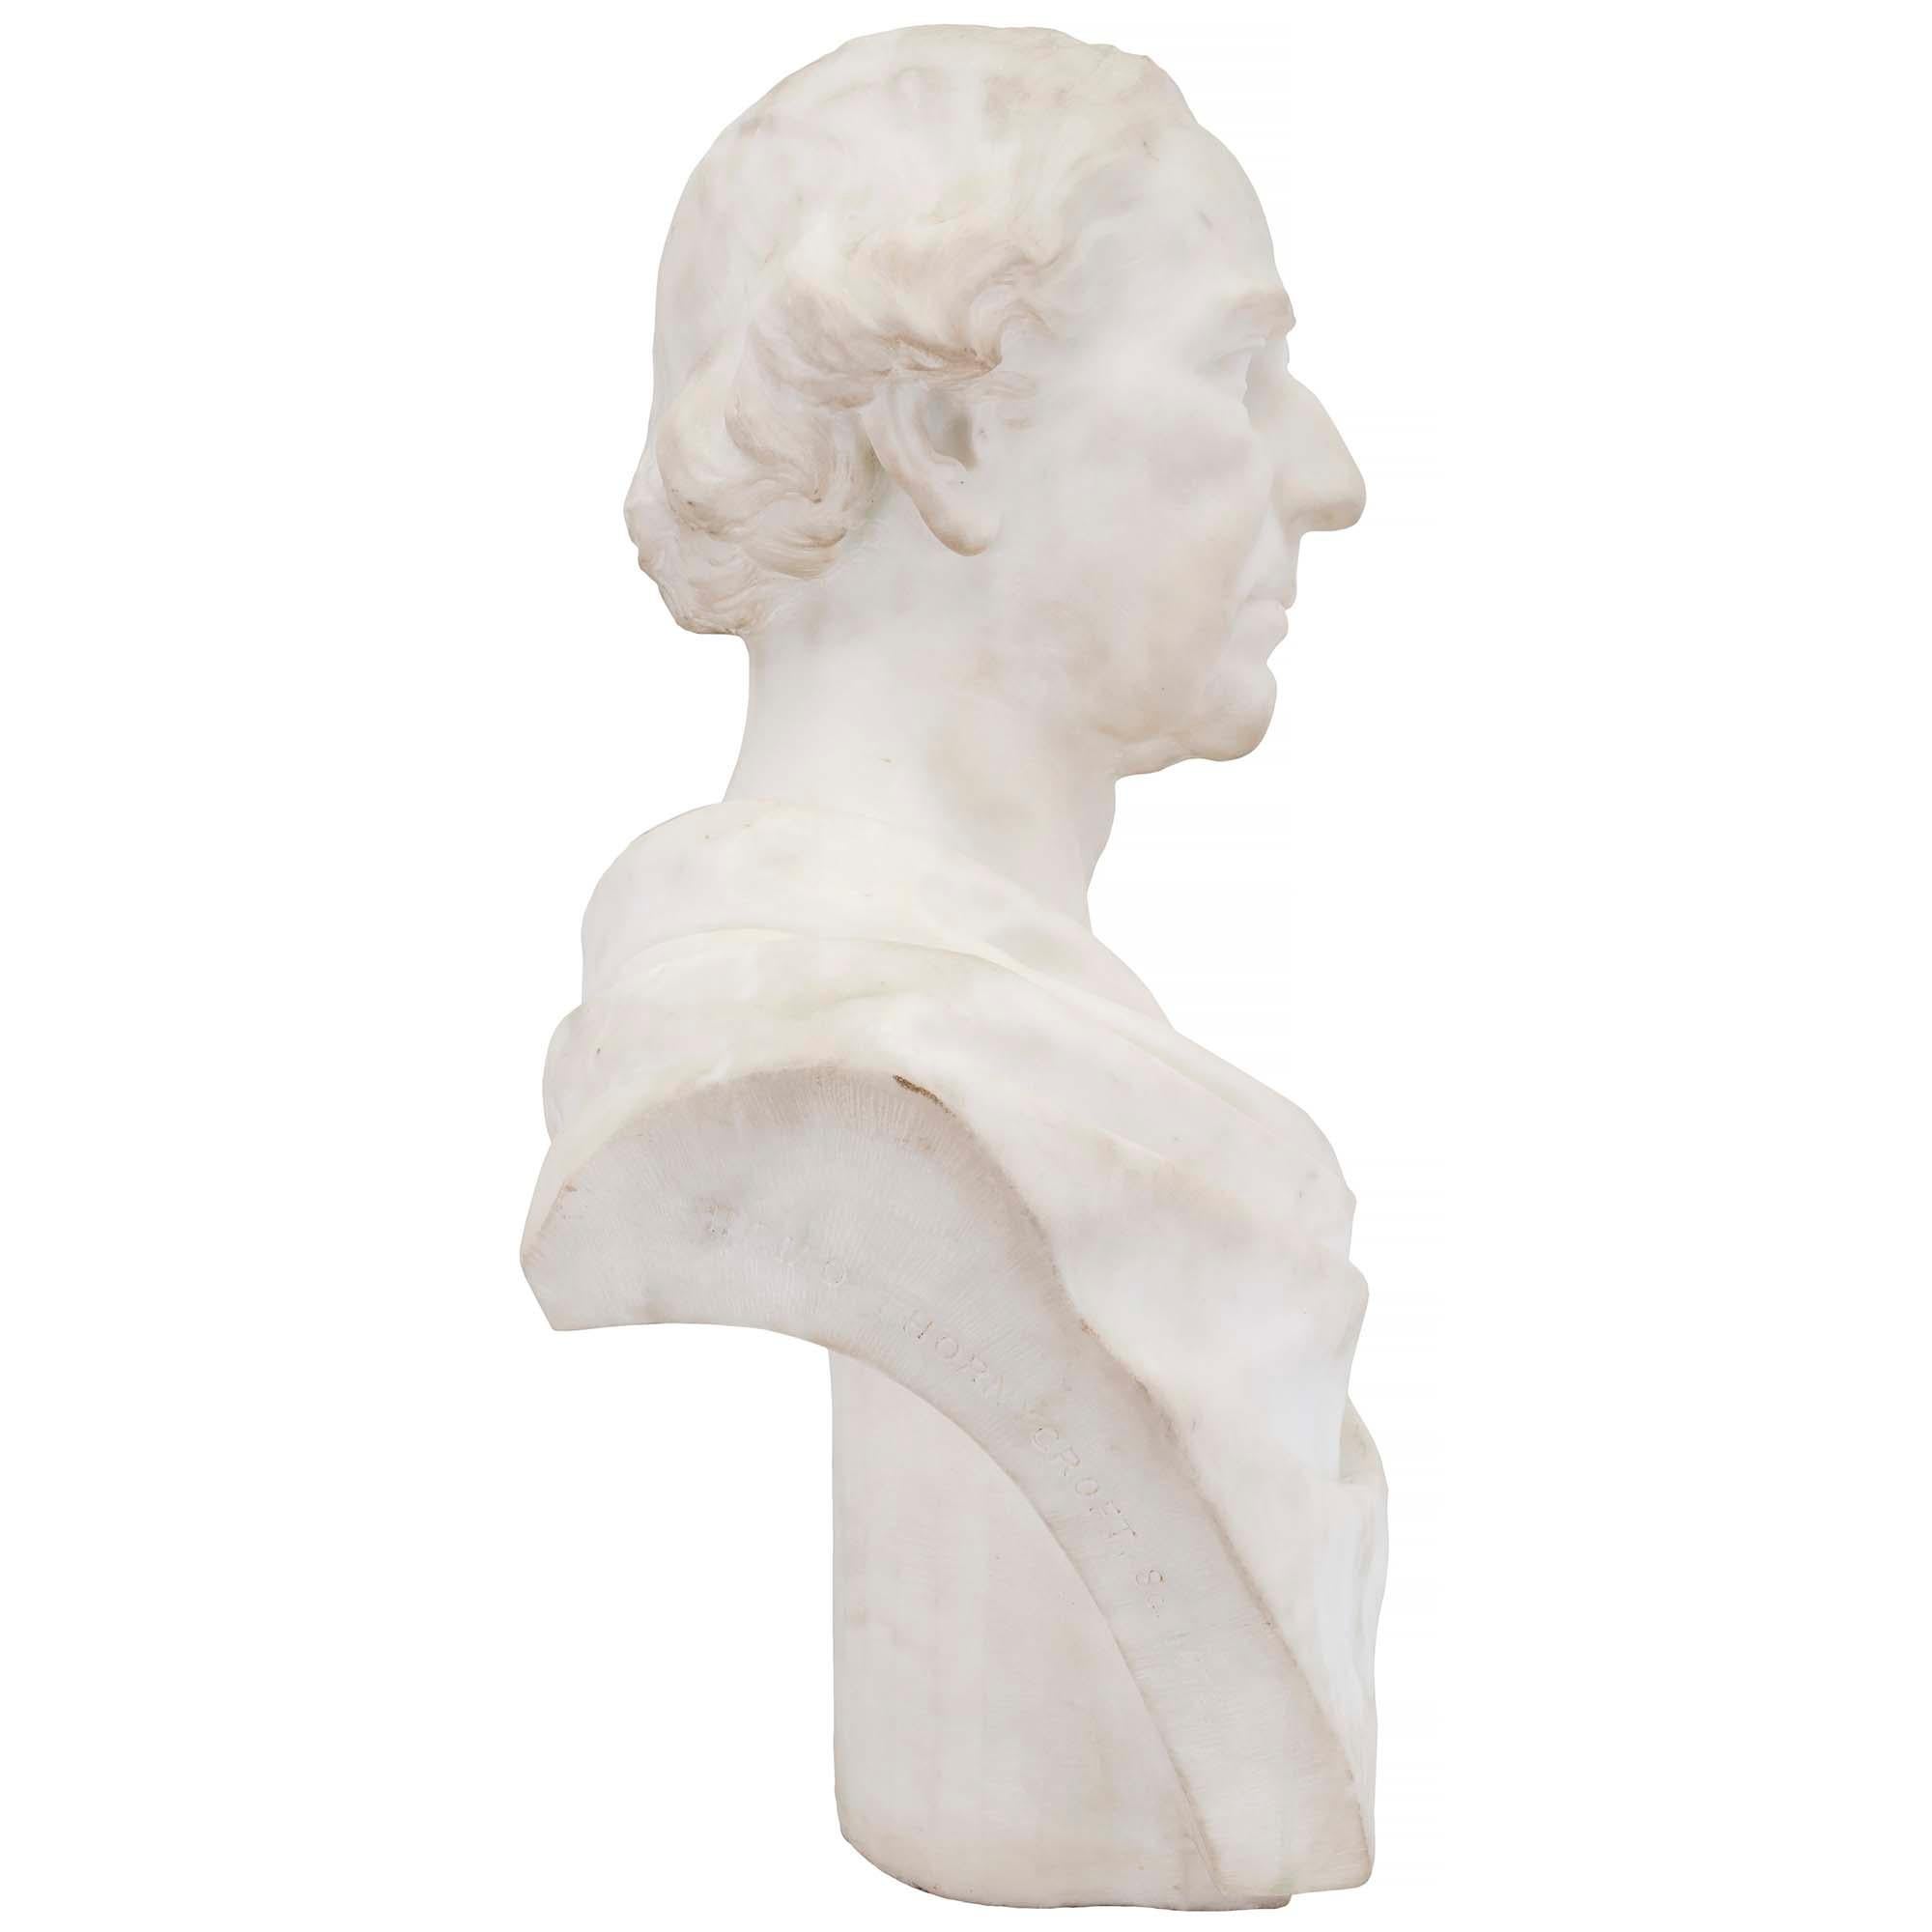 English 19th Century White Carrara Marble Bust by Sir William Hamo Thornycroft In Good Condition For Sale In West Palm Beach, FL